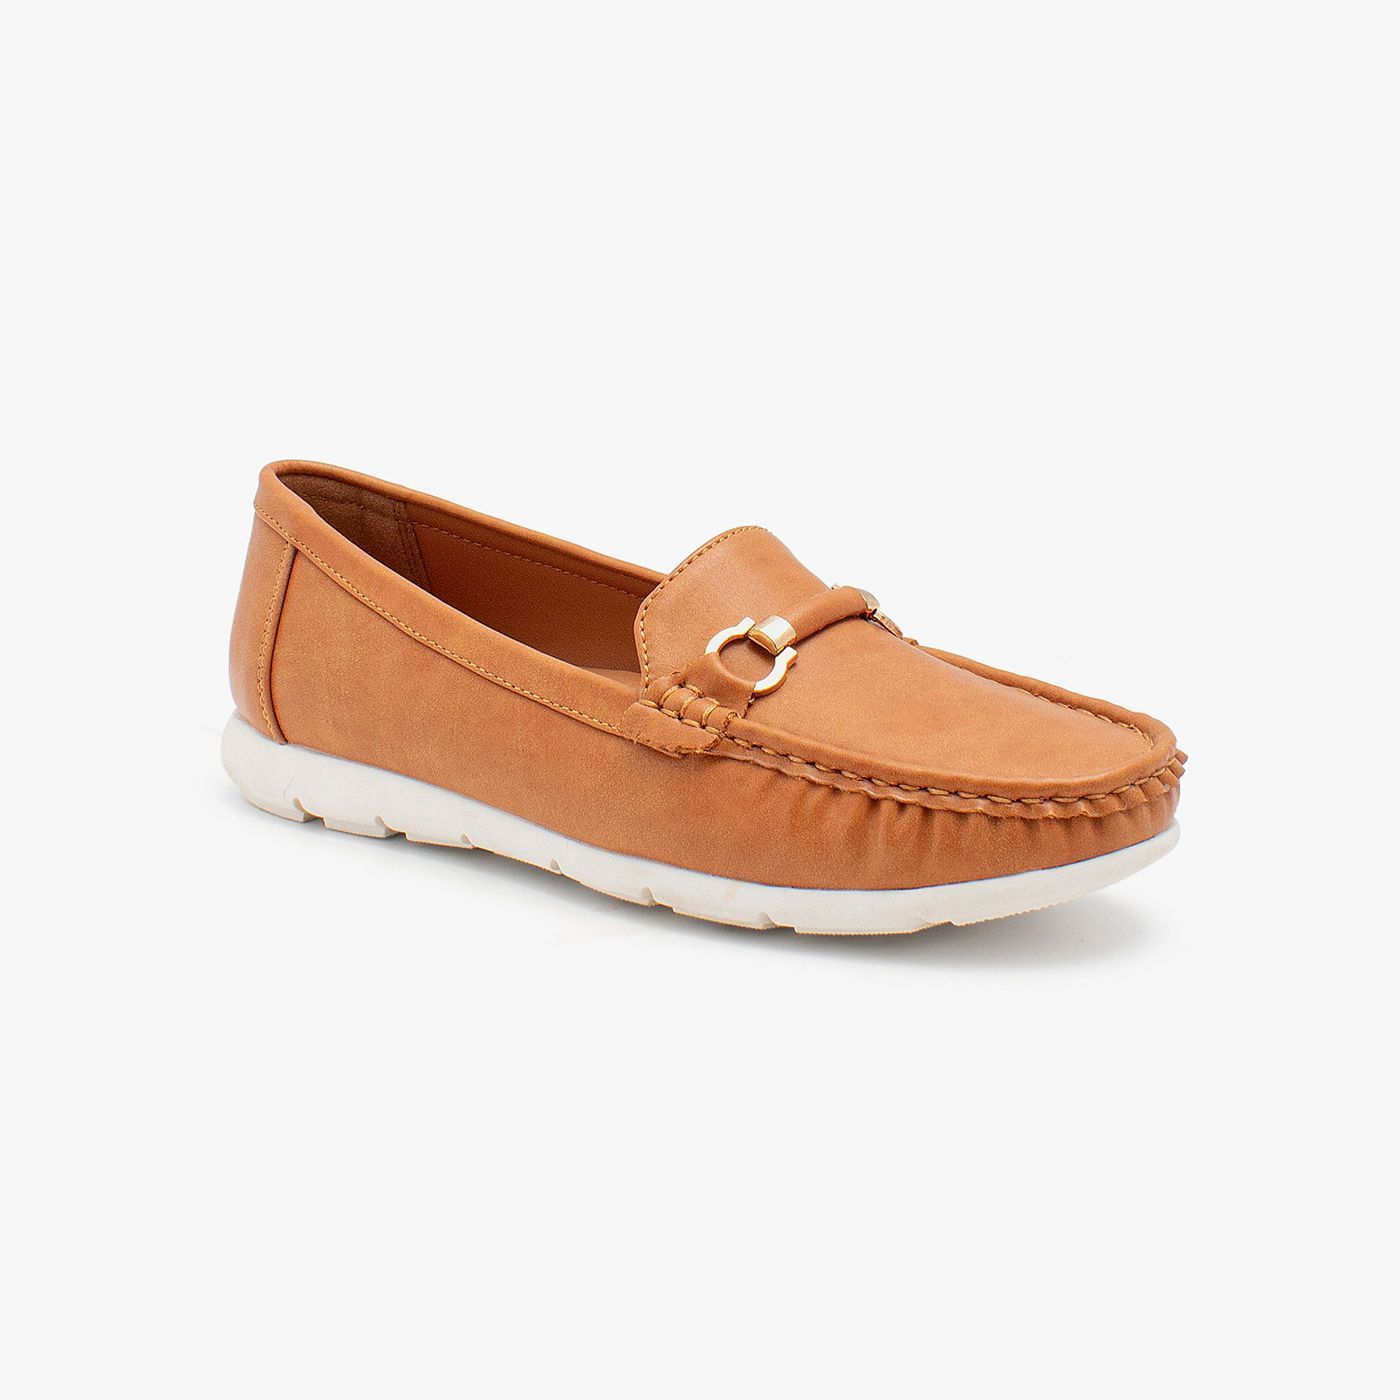 Loafer shoes for girls